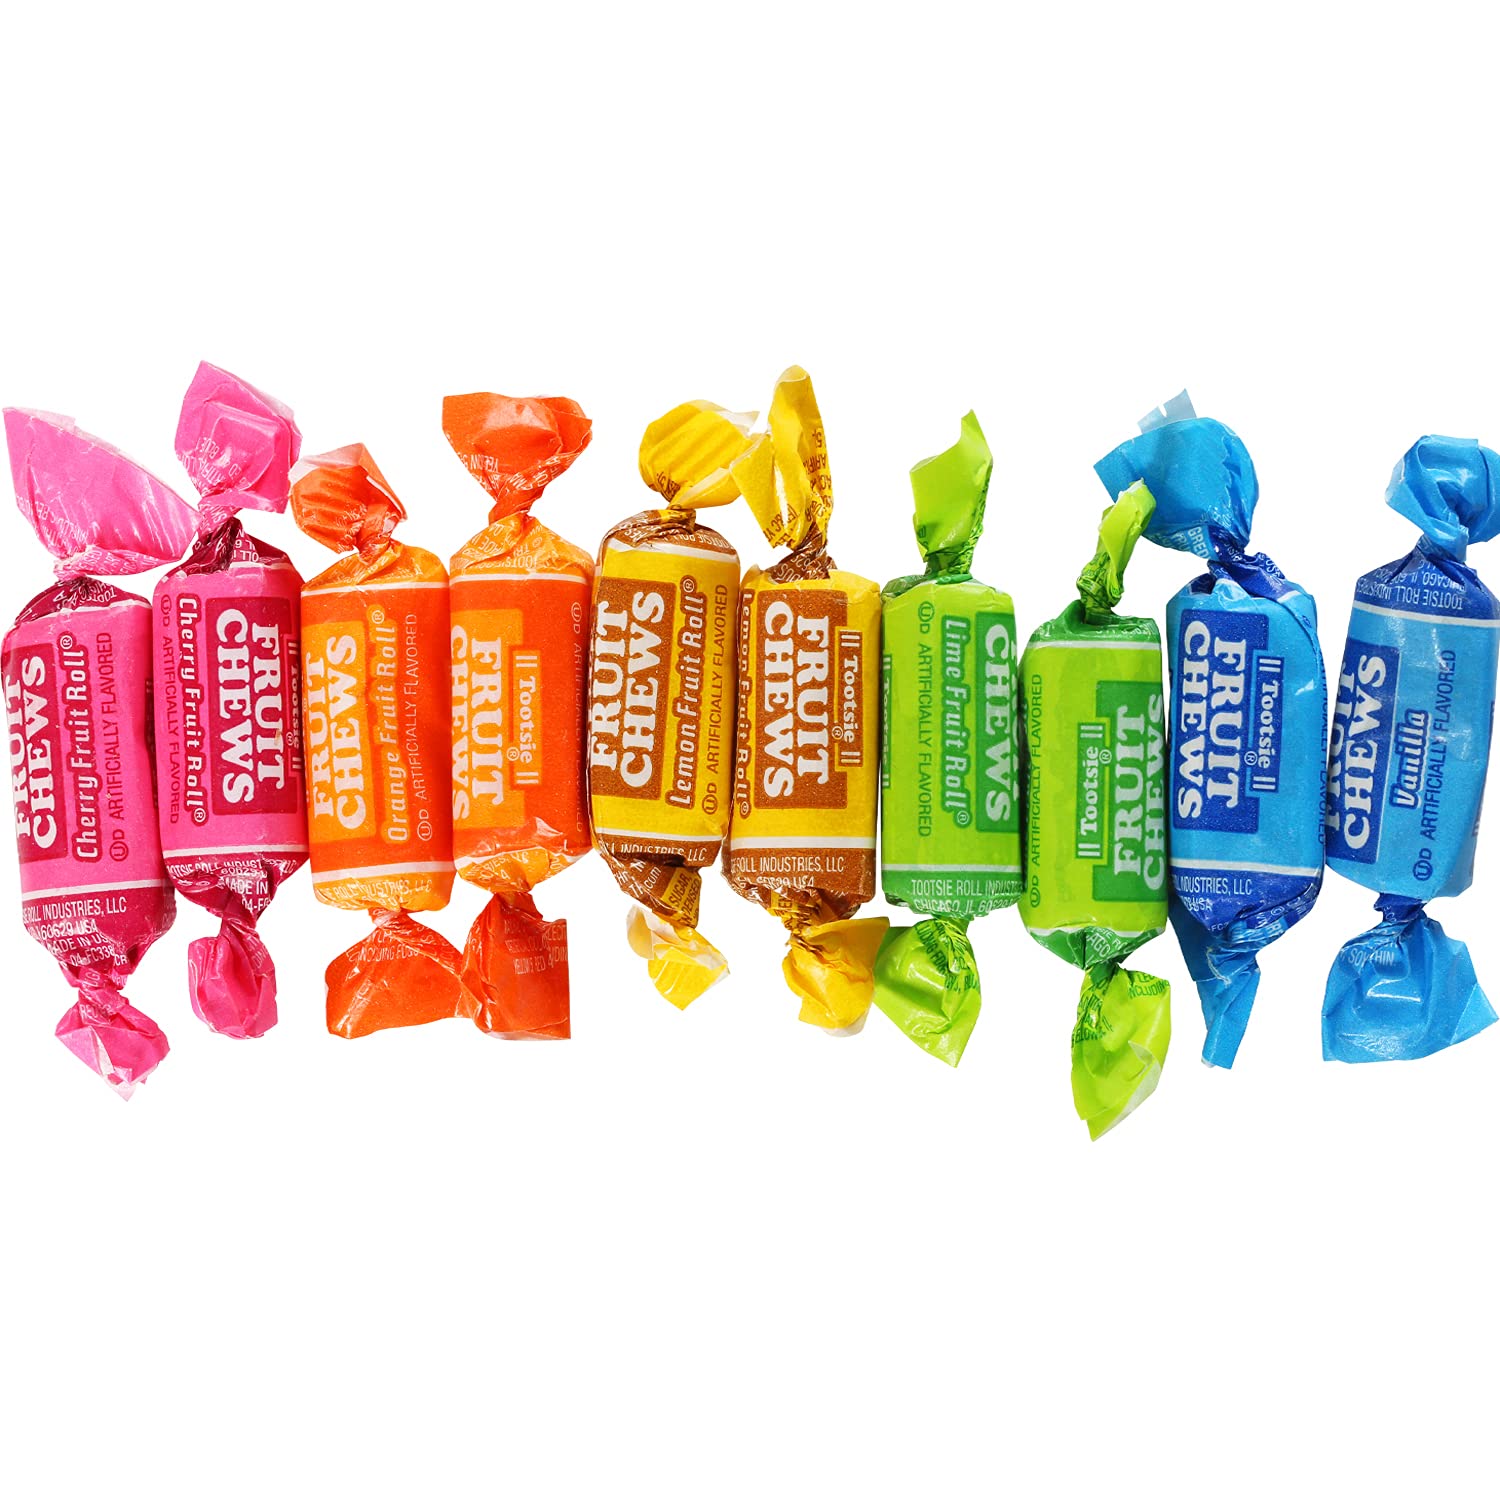 10 individually wrapped fruit flavored Tootsie rolls.